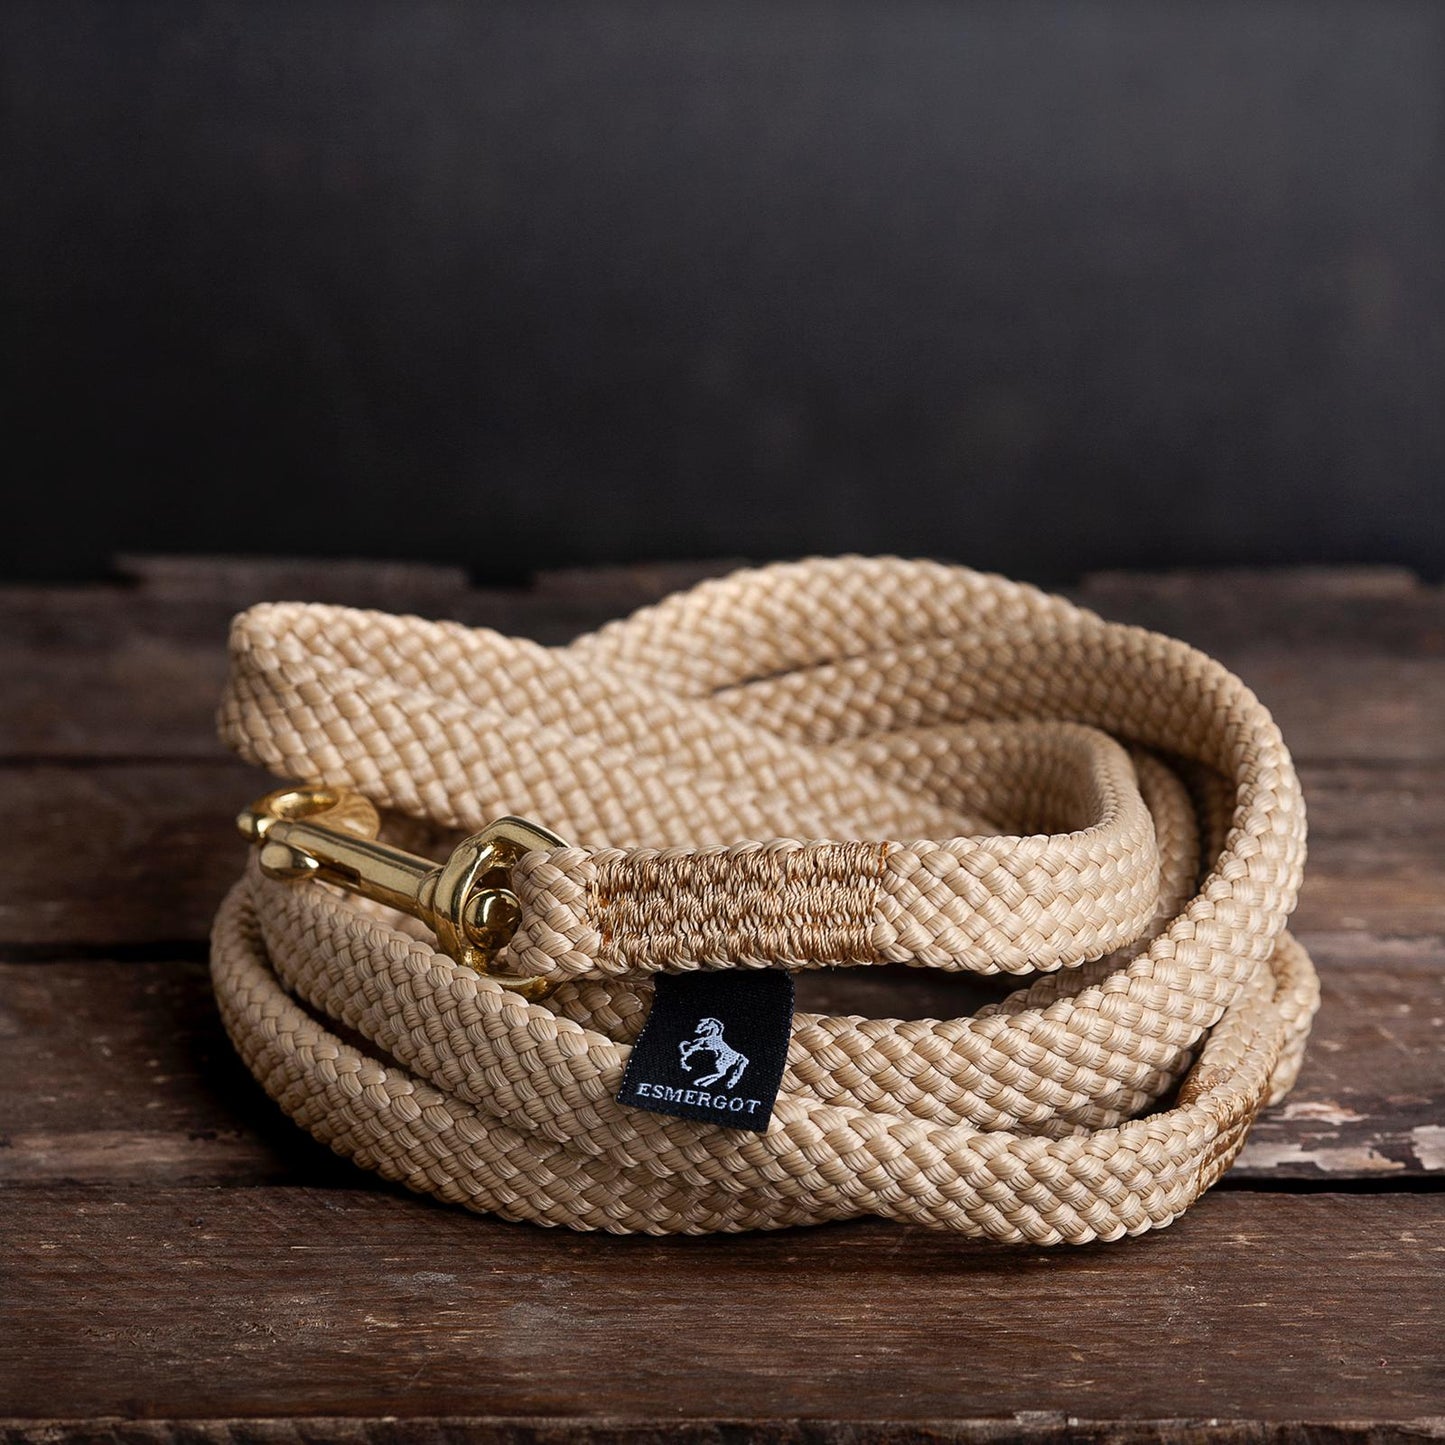 Dog leash with brass shaker